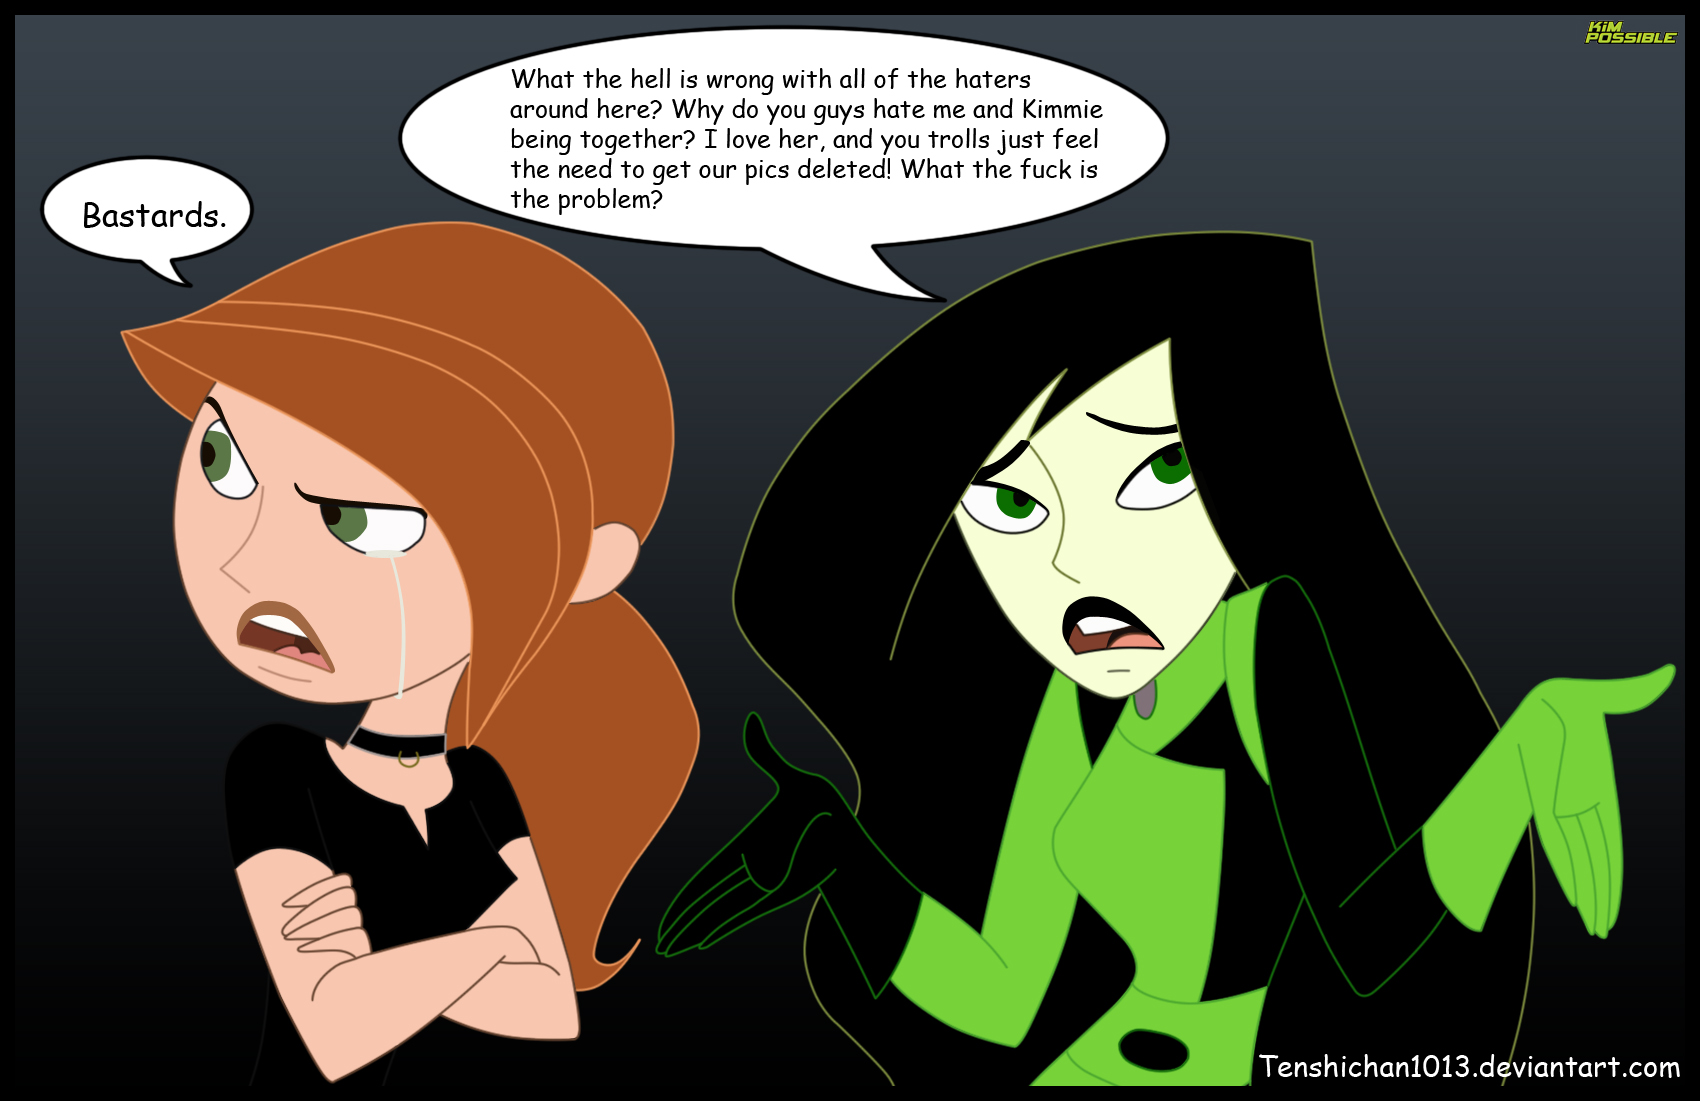 Shego addressing the haters